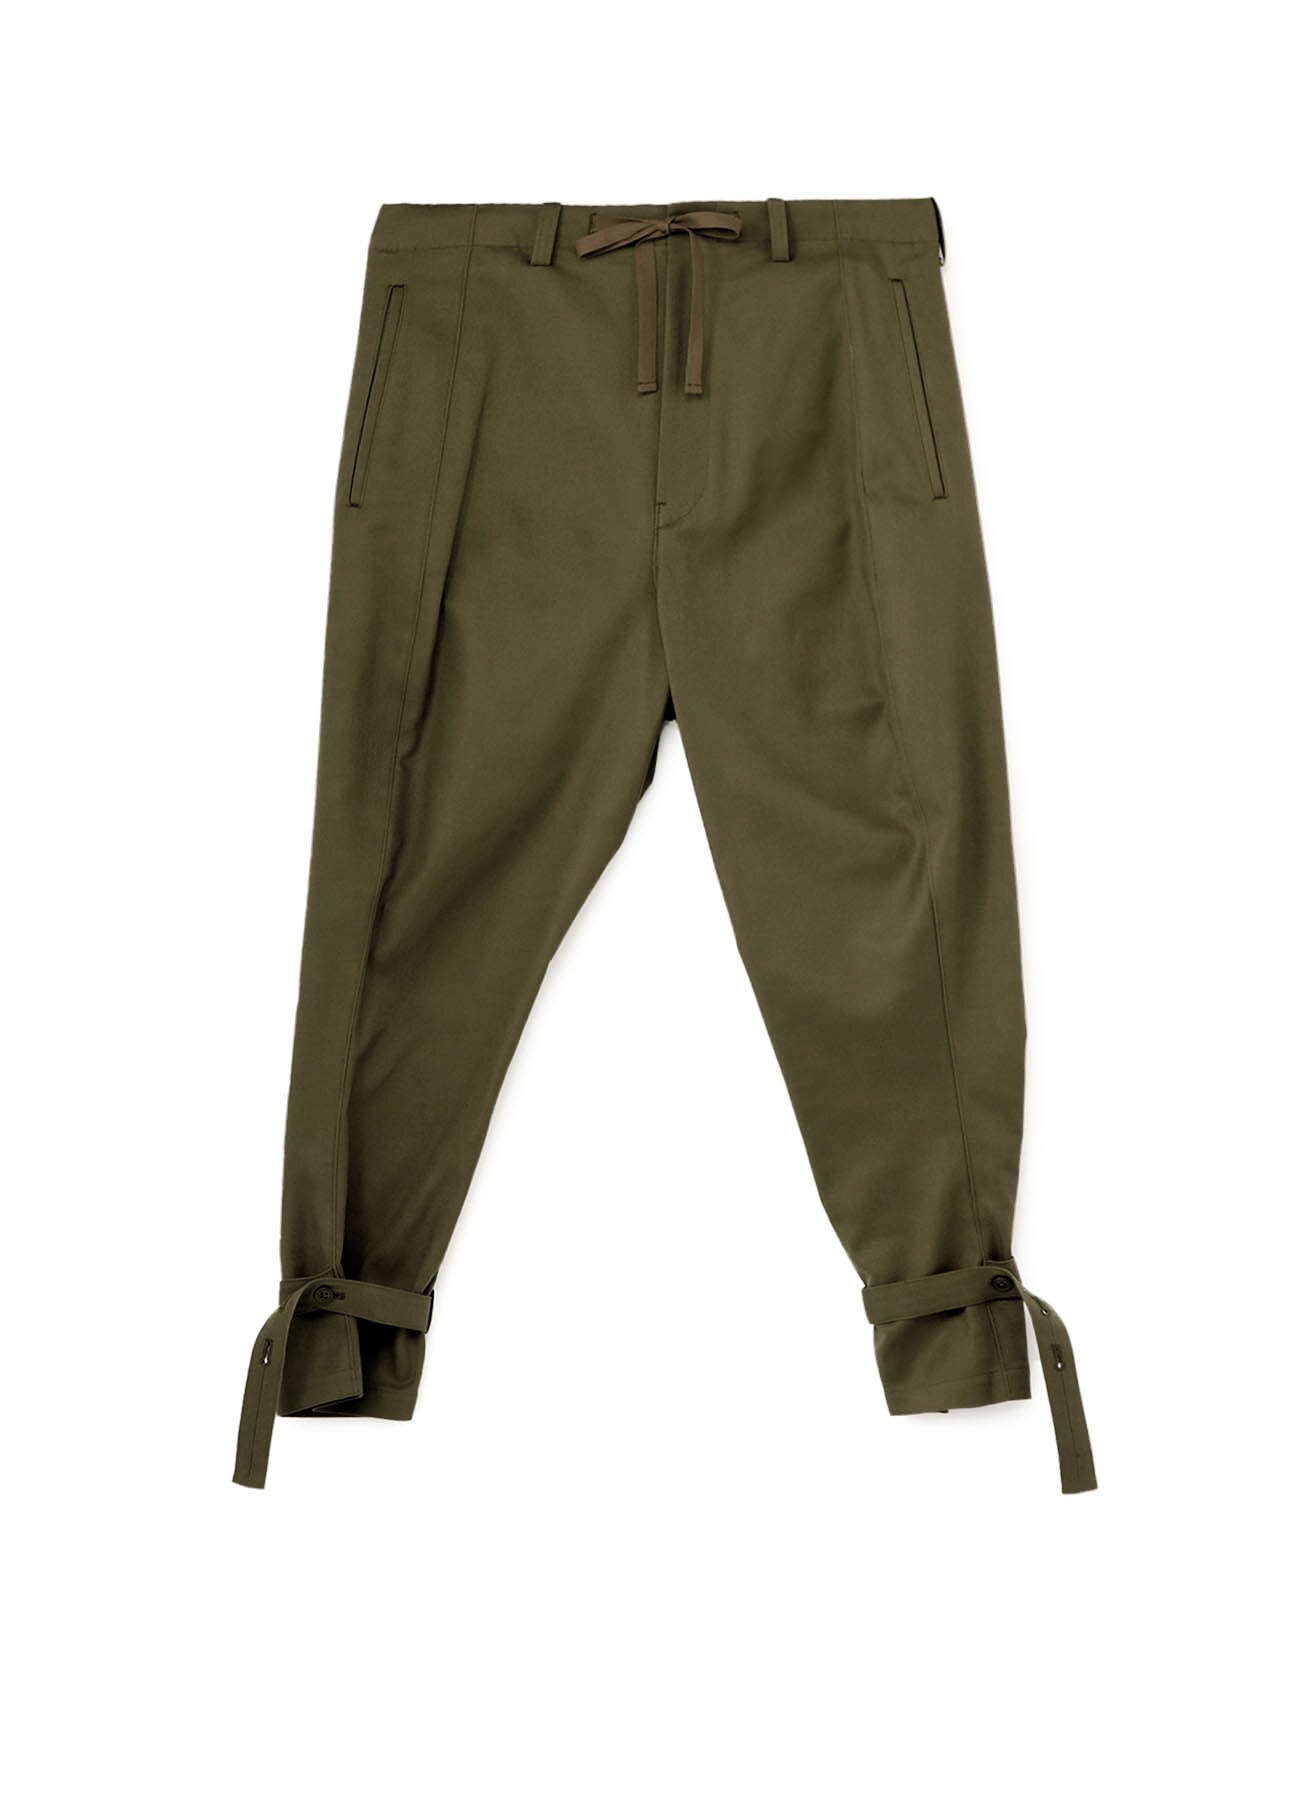 French Worker Surge M-59 Cargo Pants